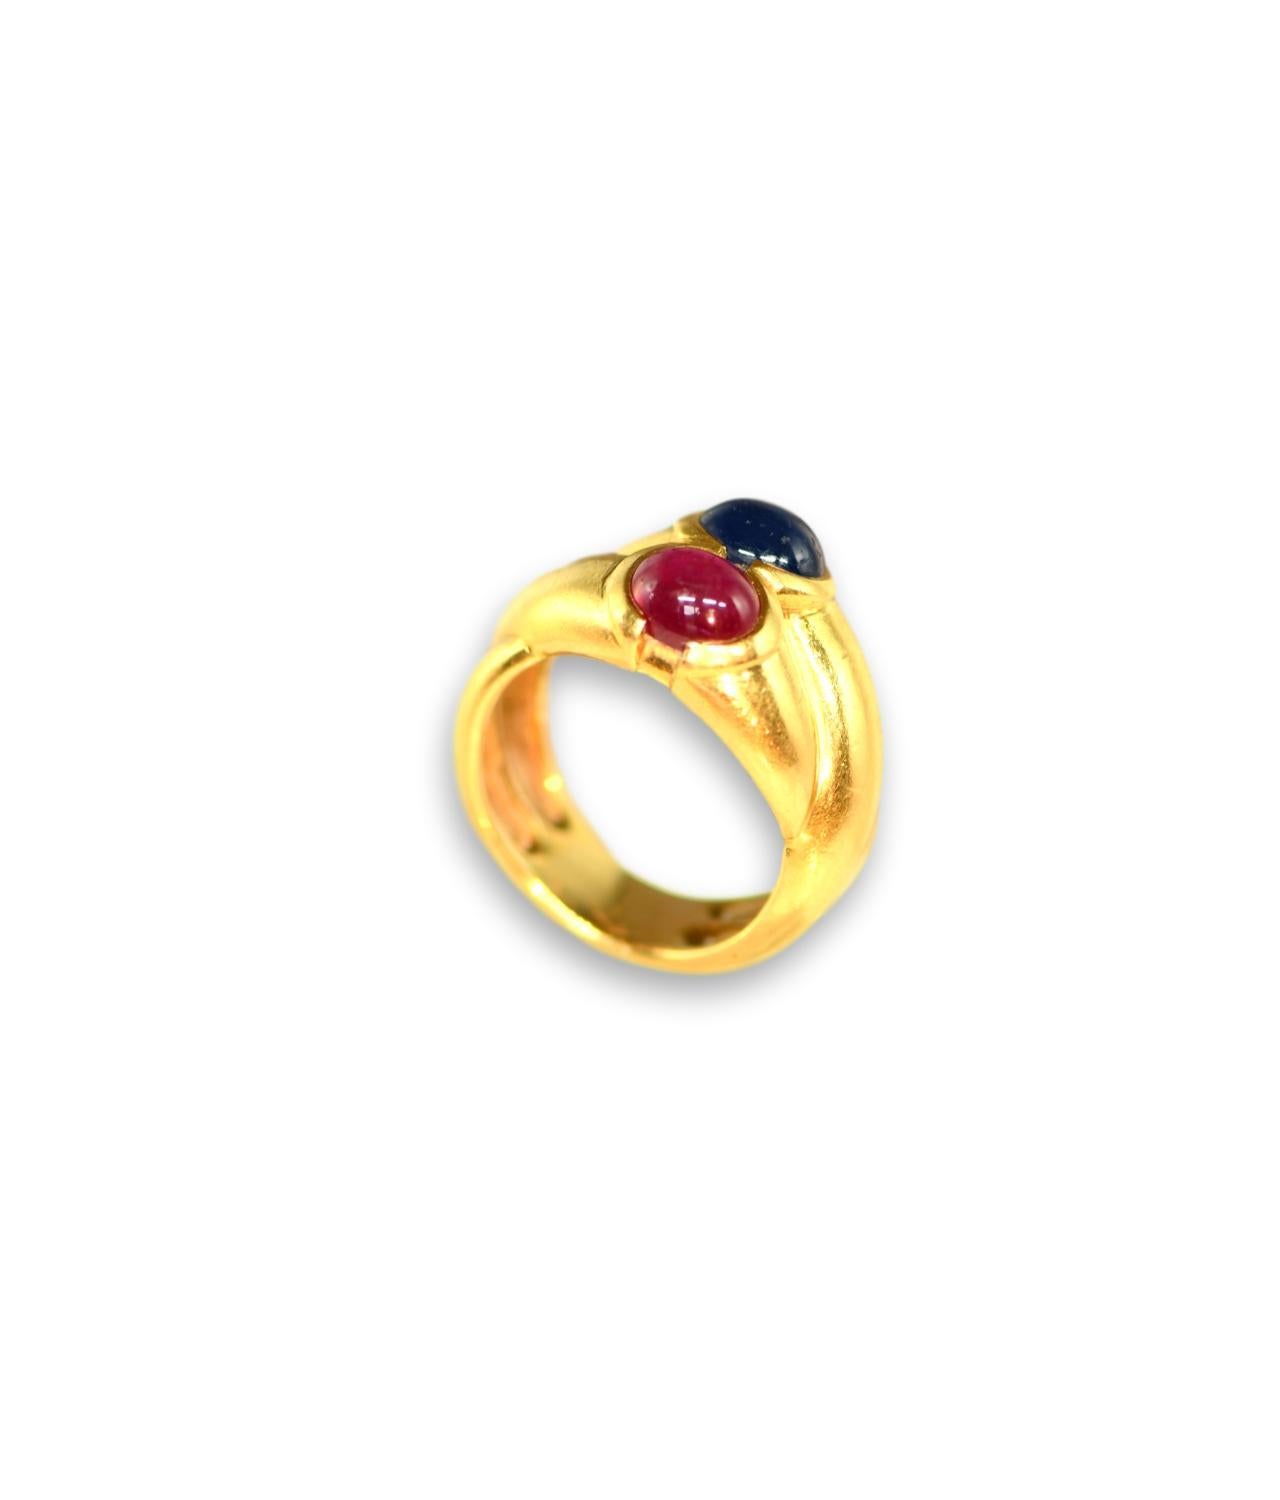 Beautiful 18k yellow gold bypass ring, featuring 7mm x 6 x 4mm sapphire and 7mm x 6.2 x 4mm ruby, both cabochons. Timeless, classy and wearable, the ring is a great addition to your jewelry collection. 

Ring size is 7 (it is re-sizable)
Stamped